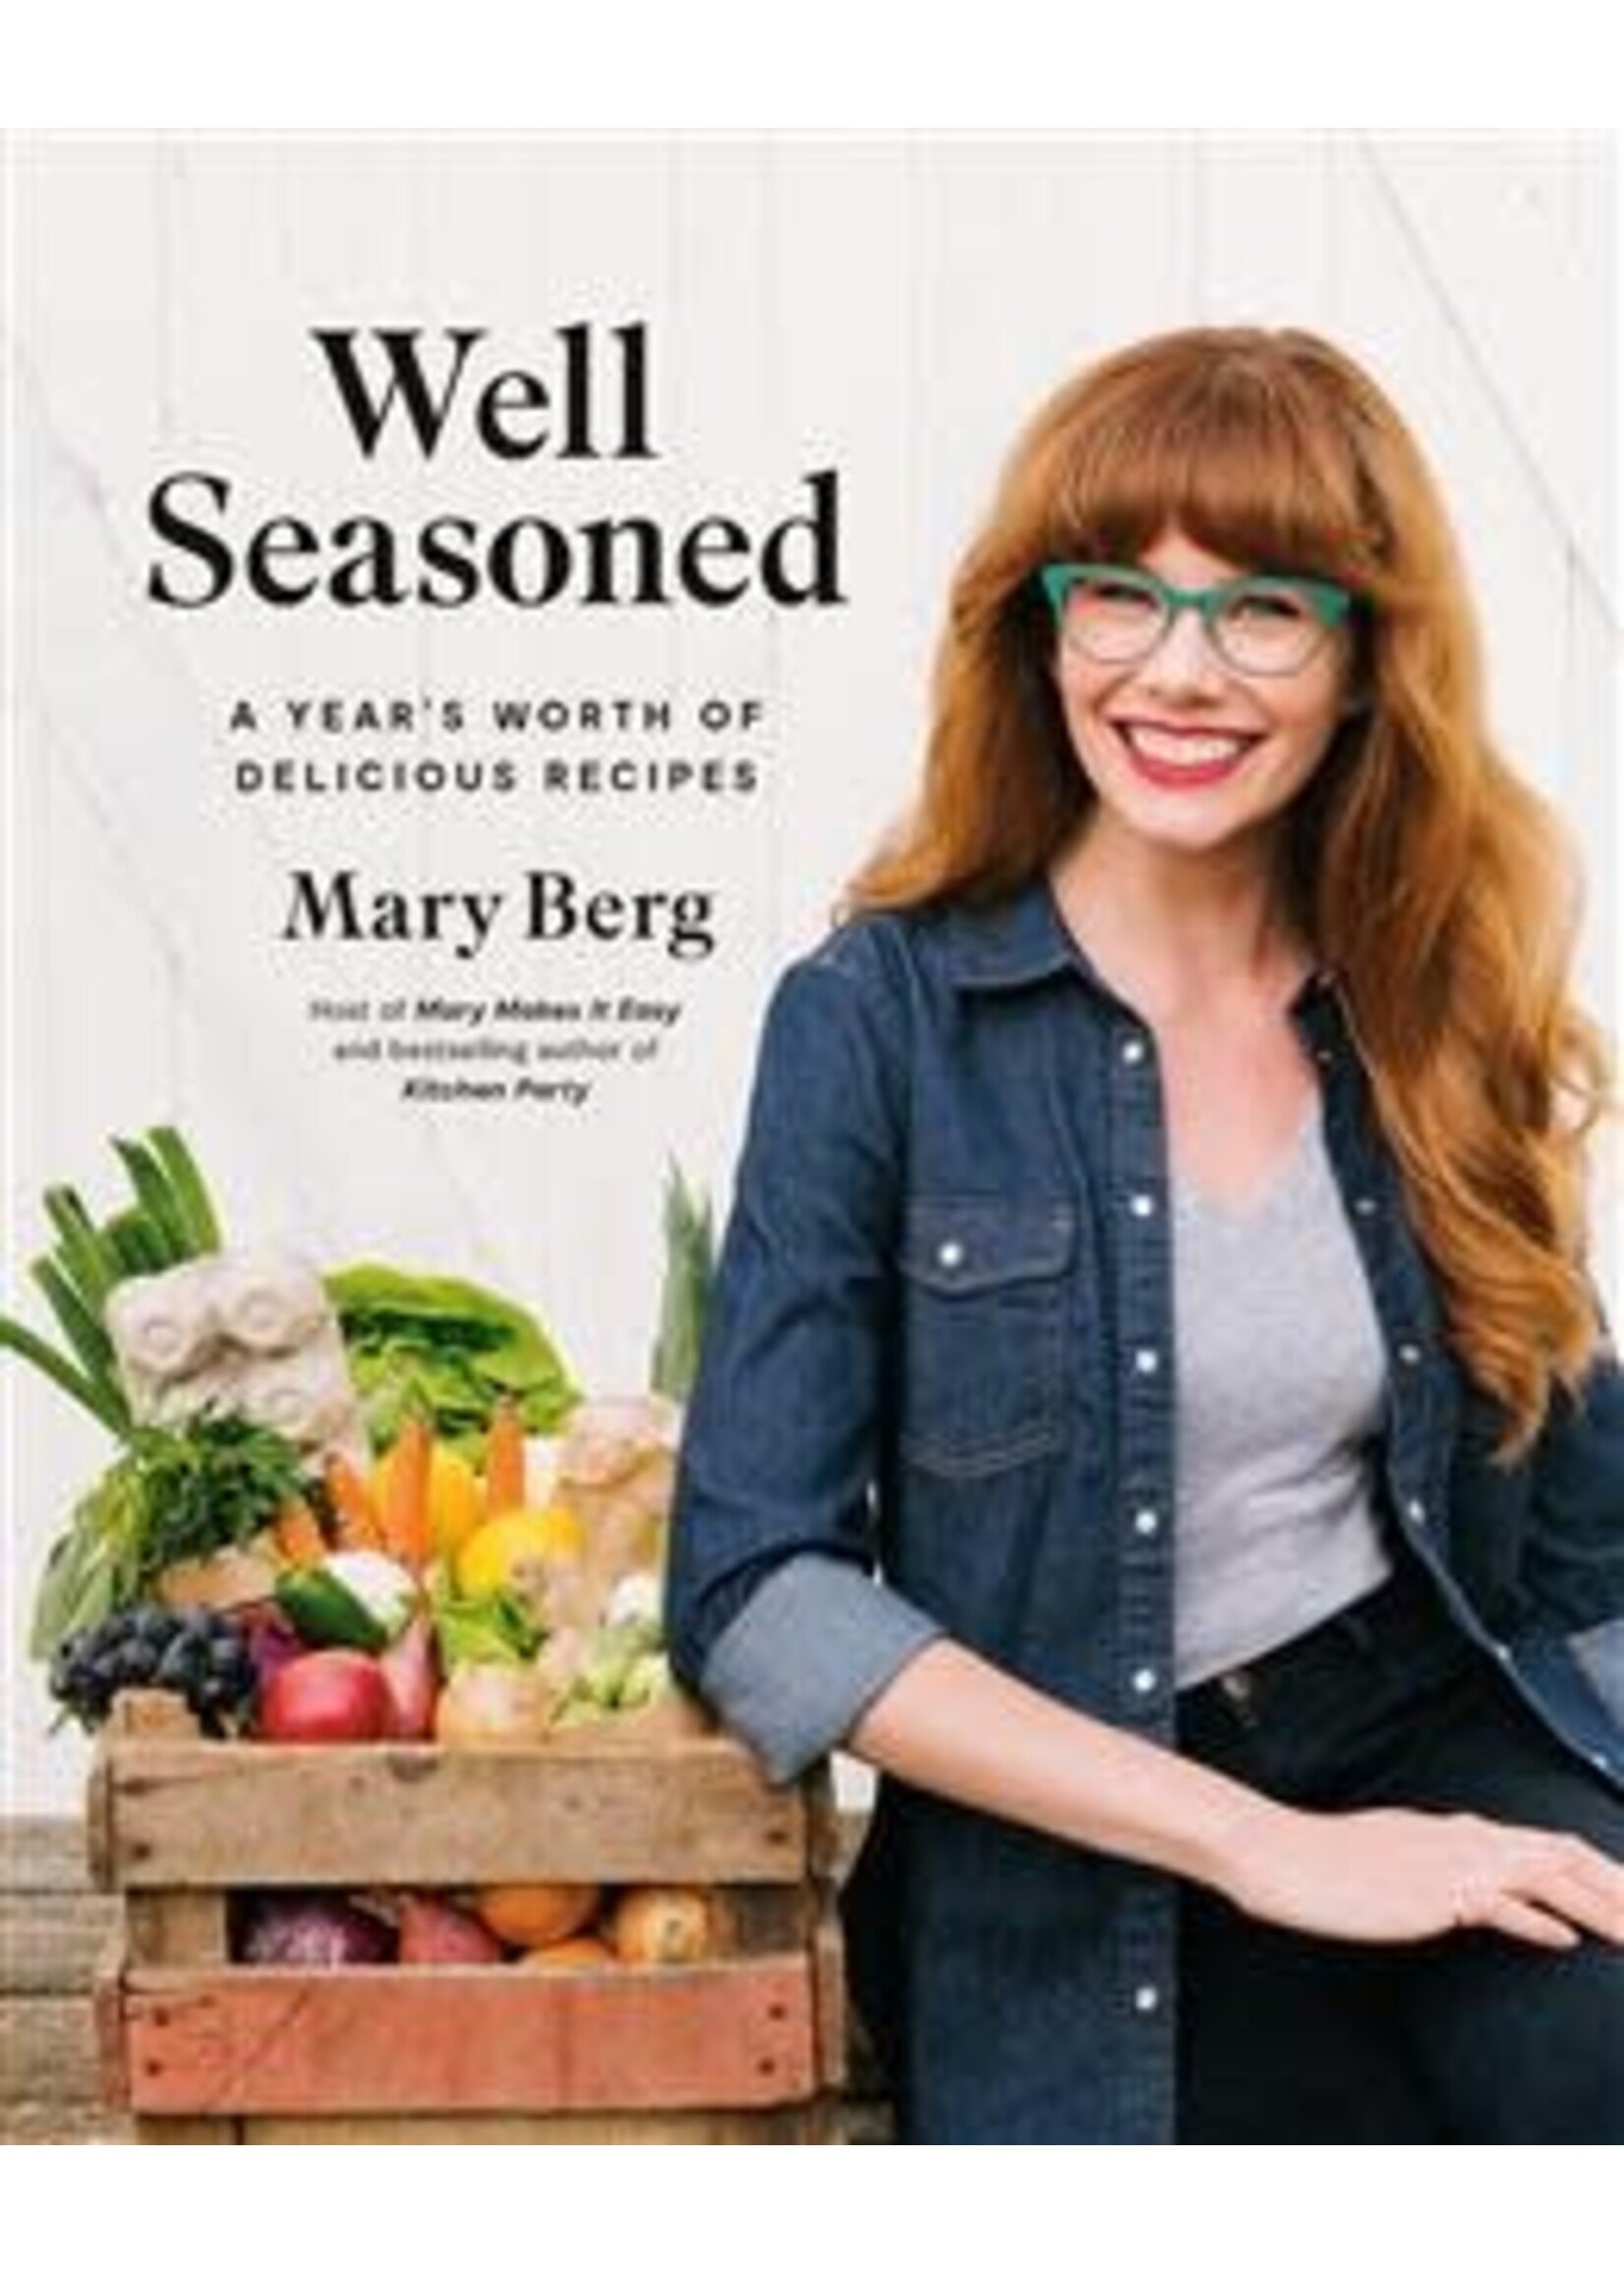 Well Seasoned: A Year's Worth of Delicious Recipes by Mary Berg